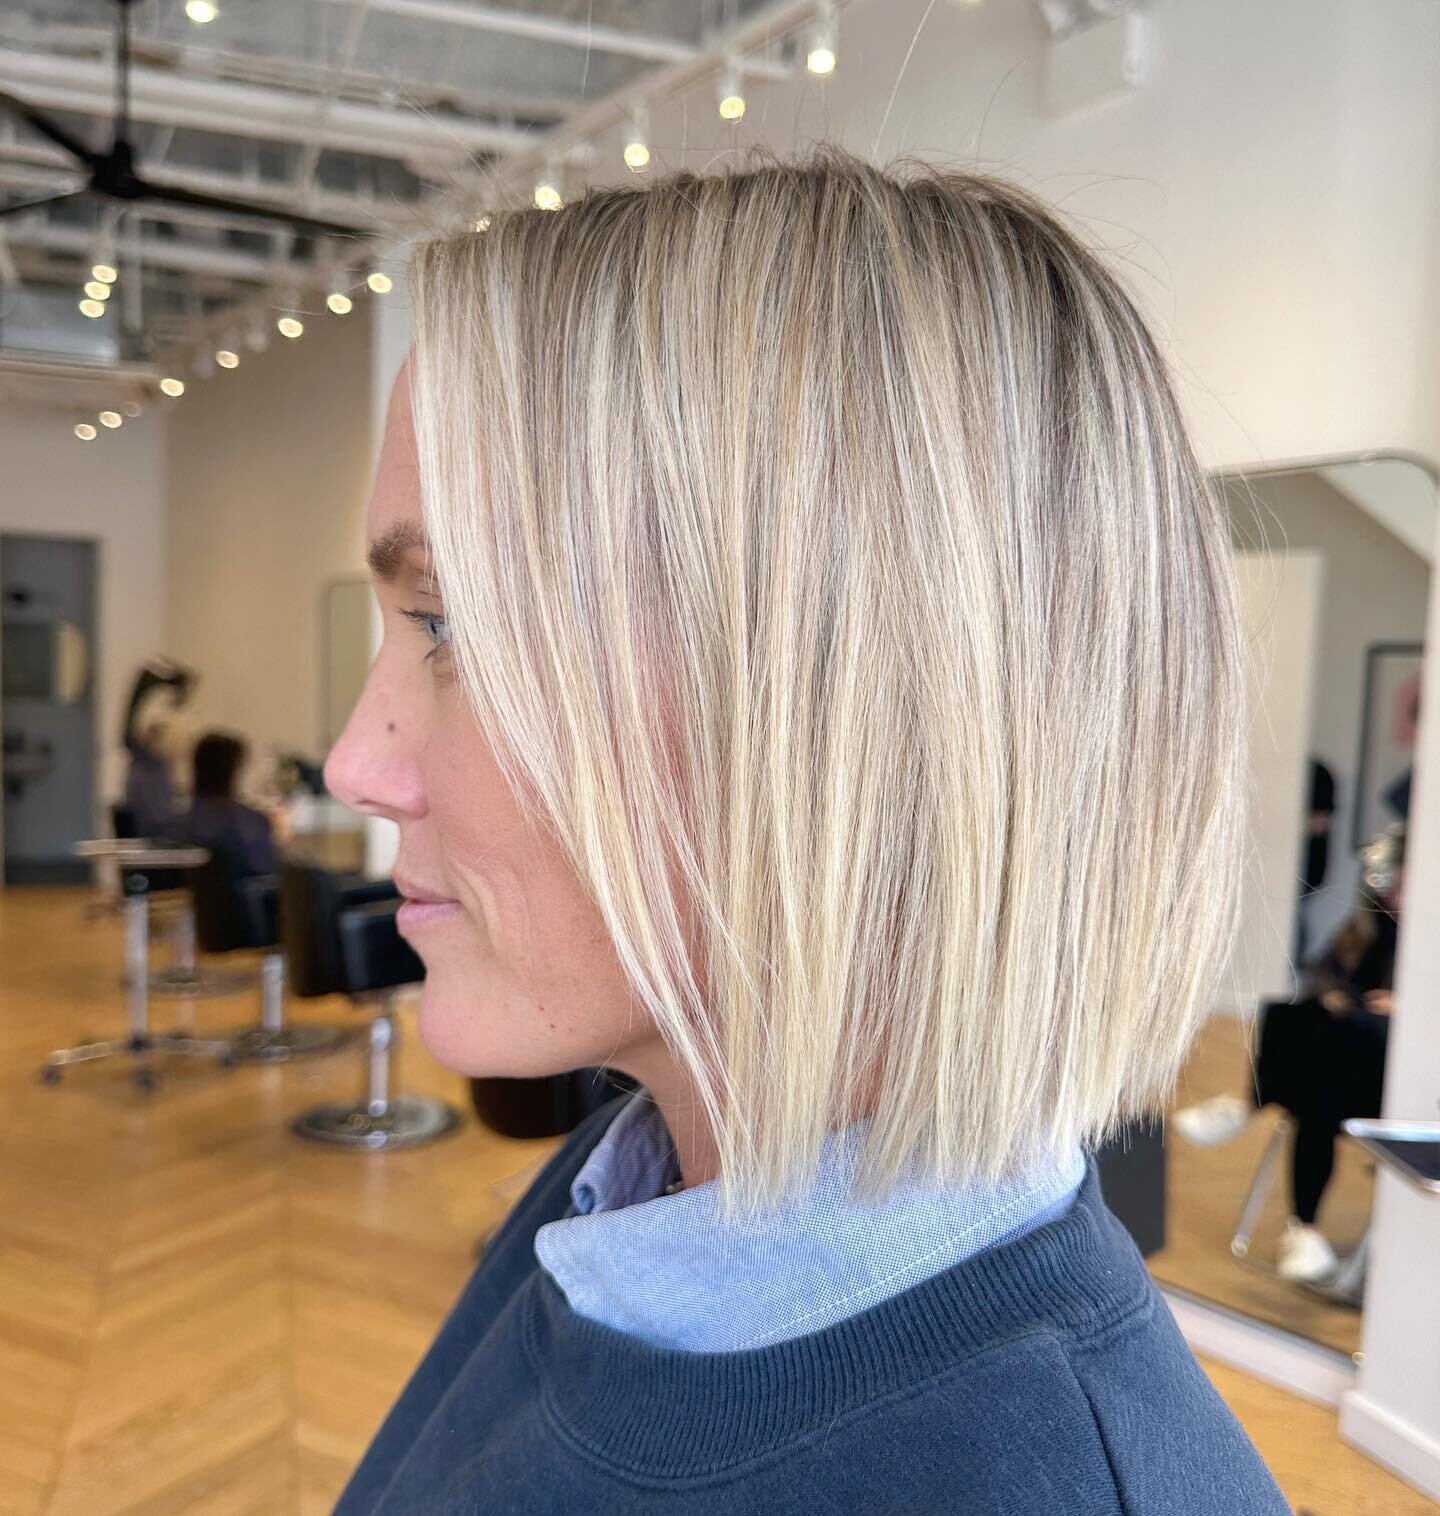 Full highlight⚡️#color by @court.e.lee #hair #style #haircolor #hairstyle #highlights #babylights #balayage #foilayage #hairpainting #blonde #blondehair #blondehighlights #coolblonde #brightblonde #blondebob #redken #oribe #hotd #hairgoals #hairenvy 